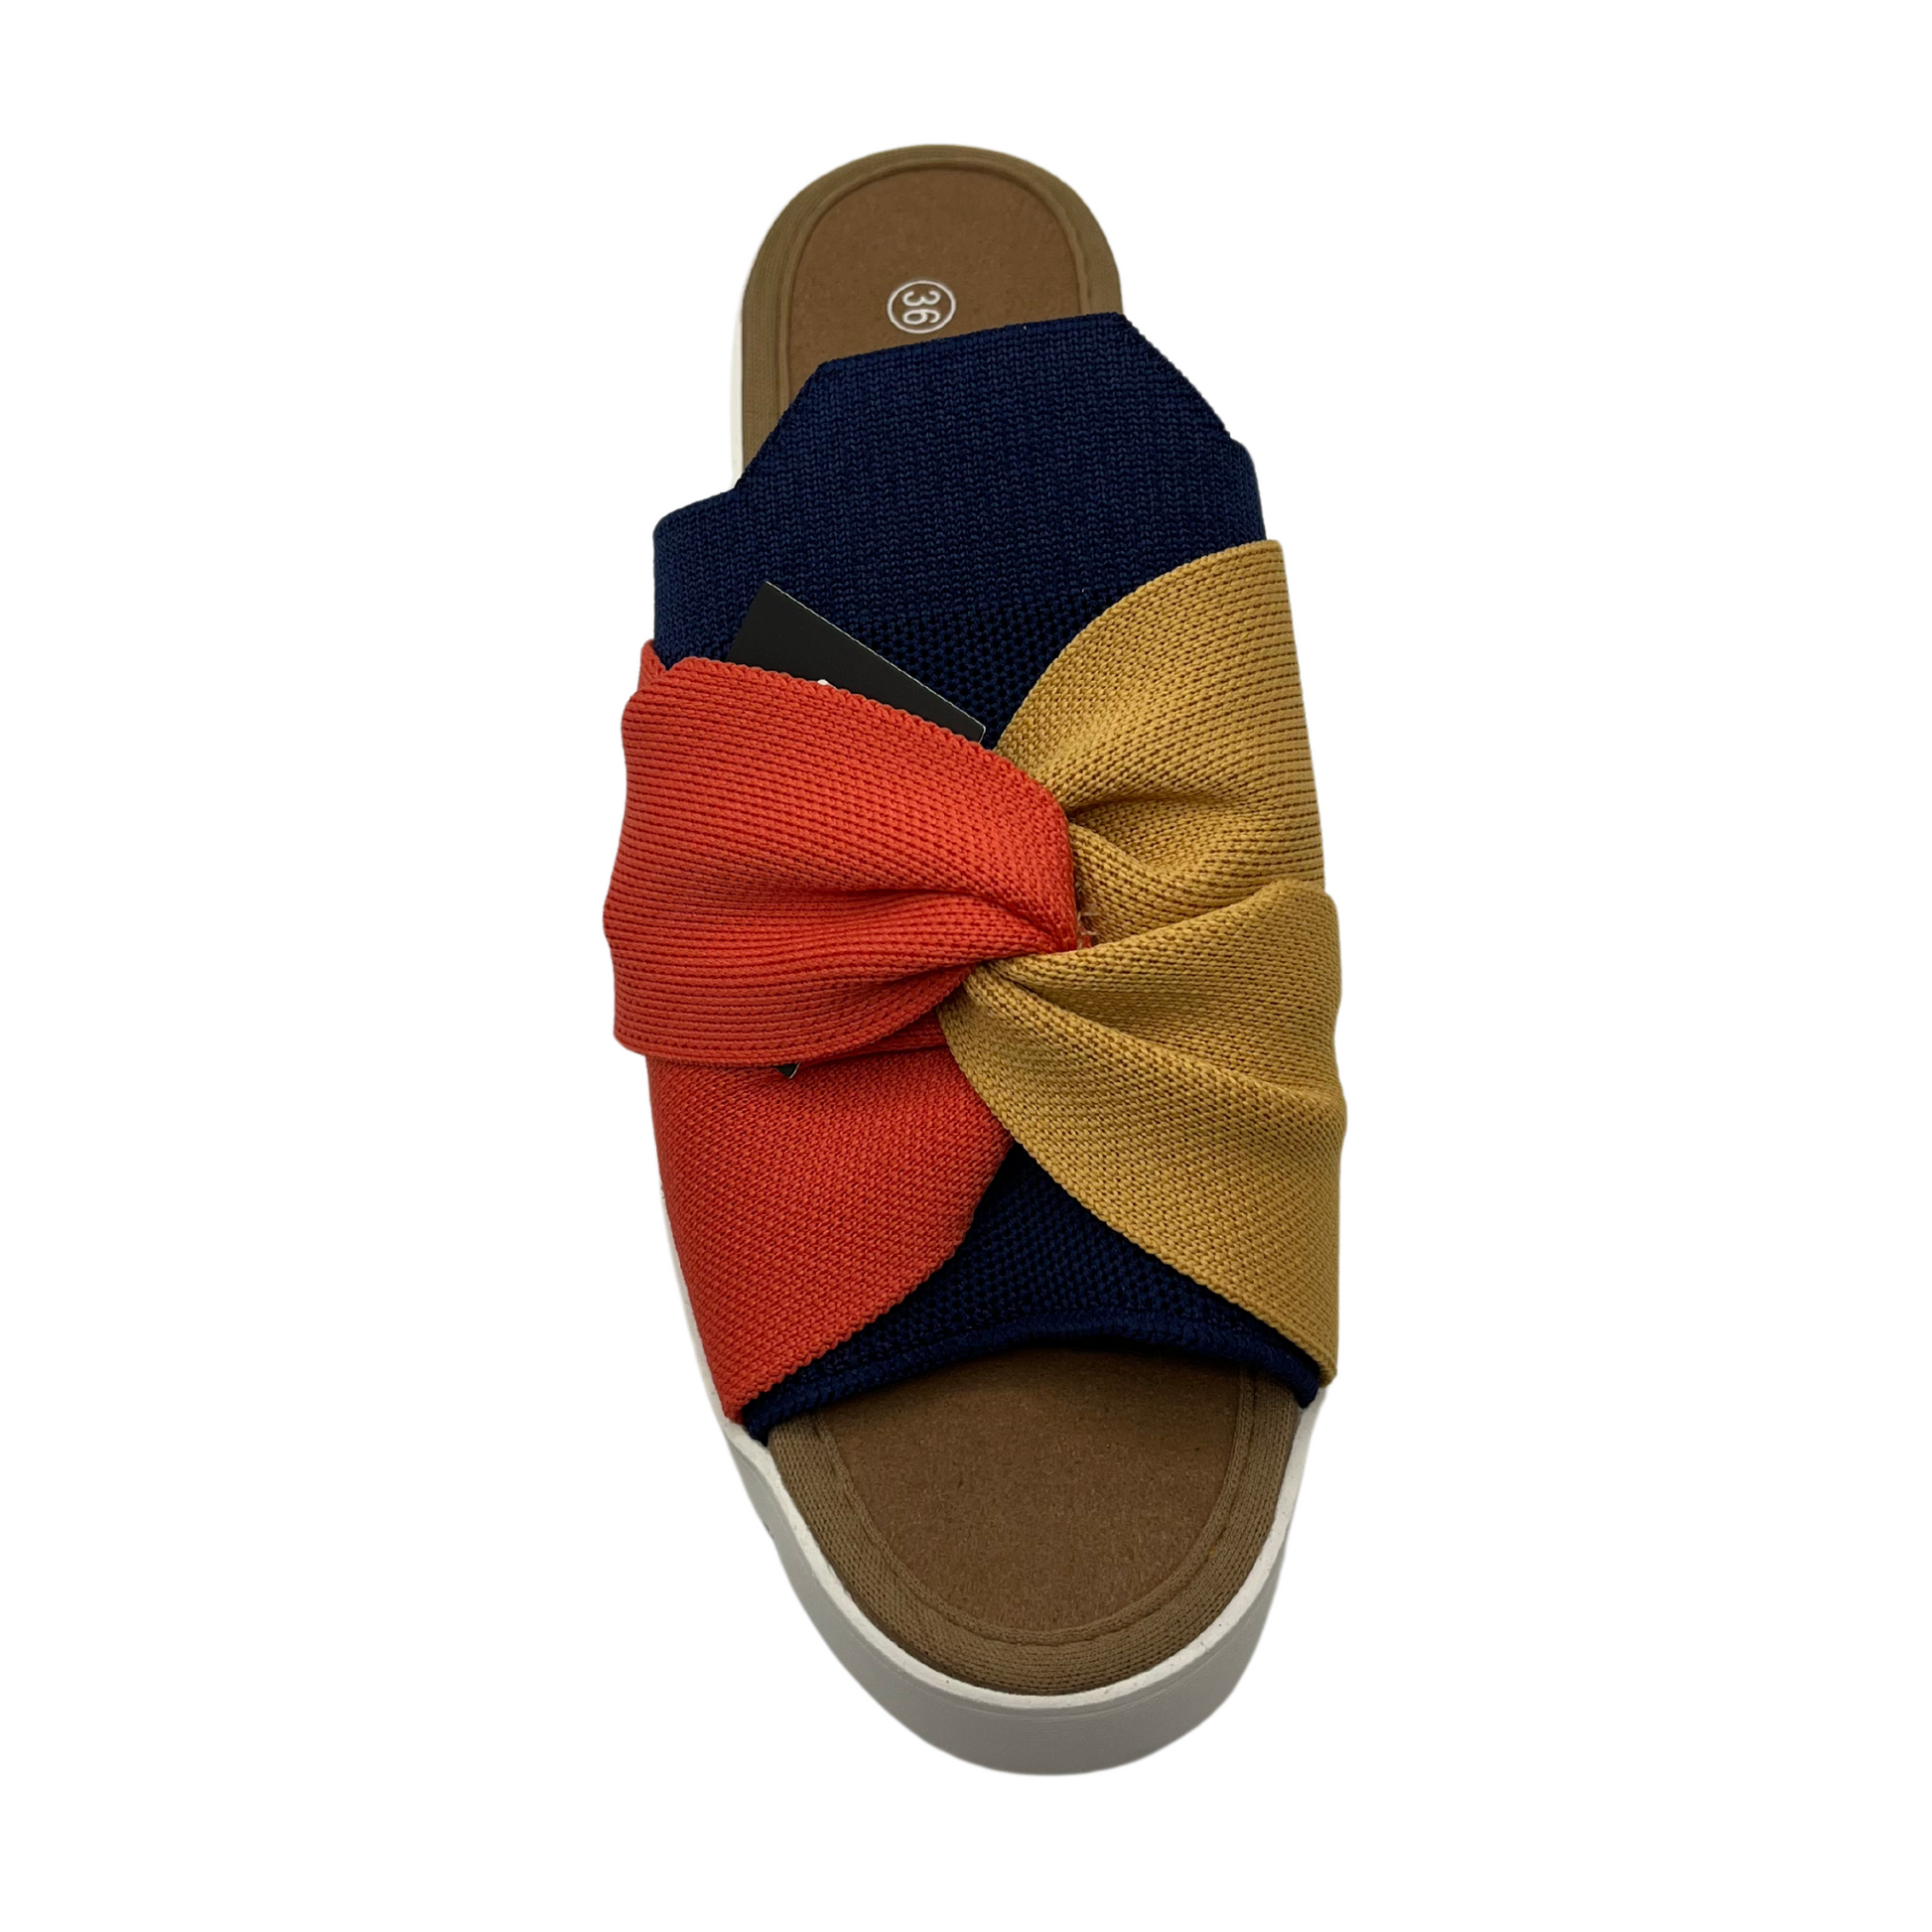 Top view of mustard, navy and nectarine elastic strap sandal with white rubber outsole